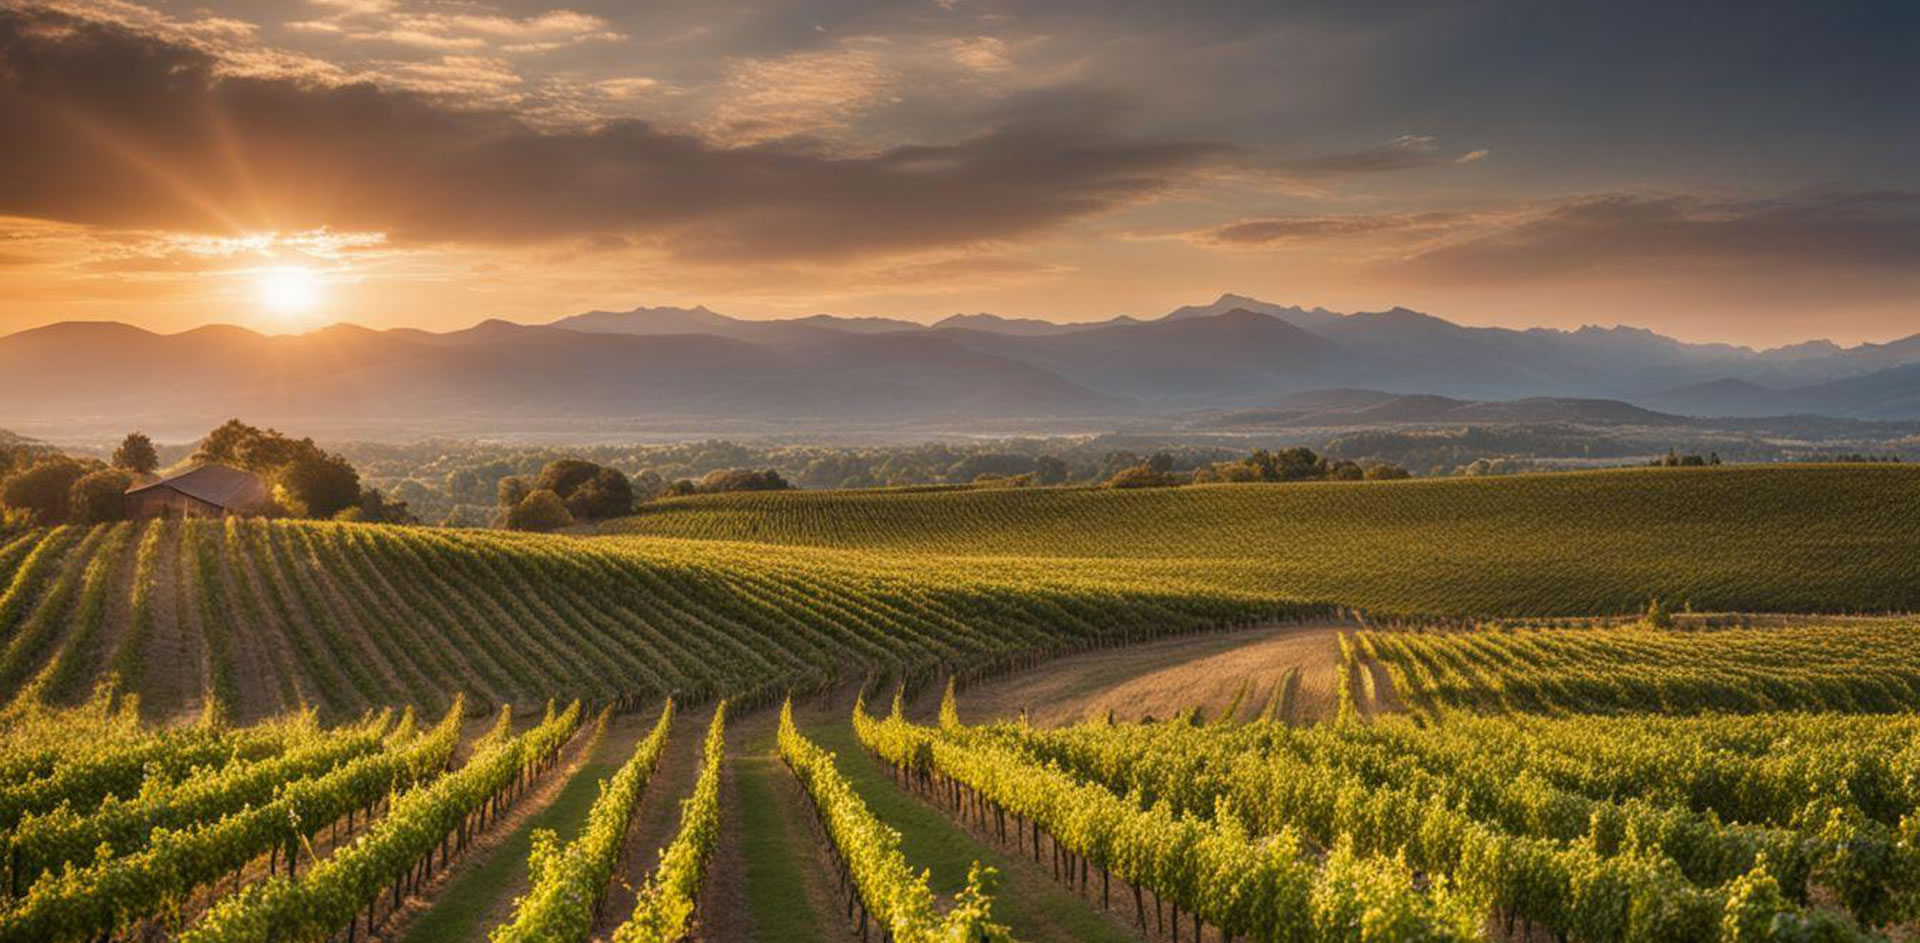 A vineyard with mountains in the background